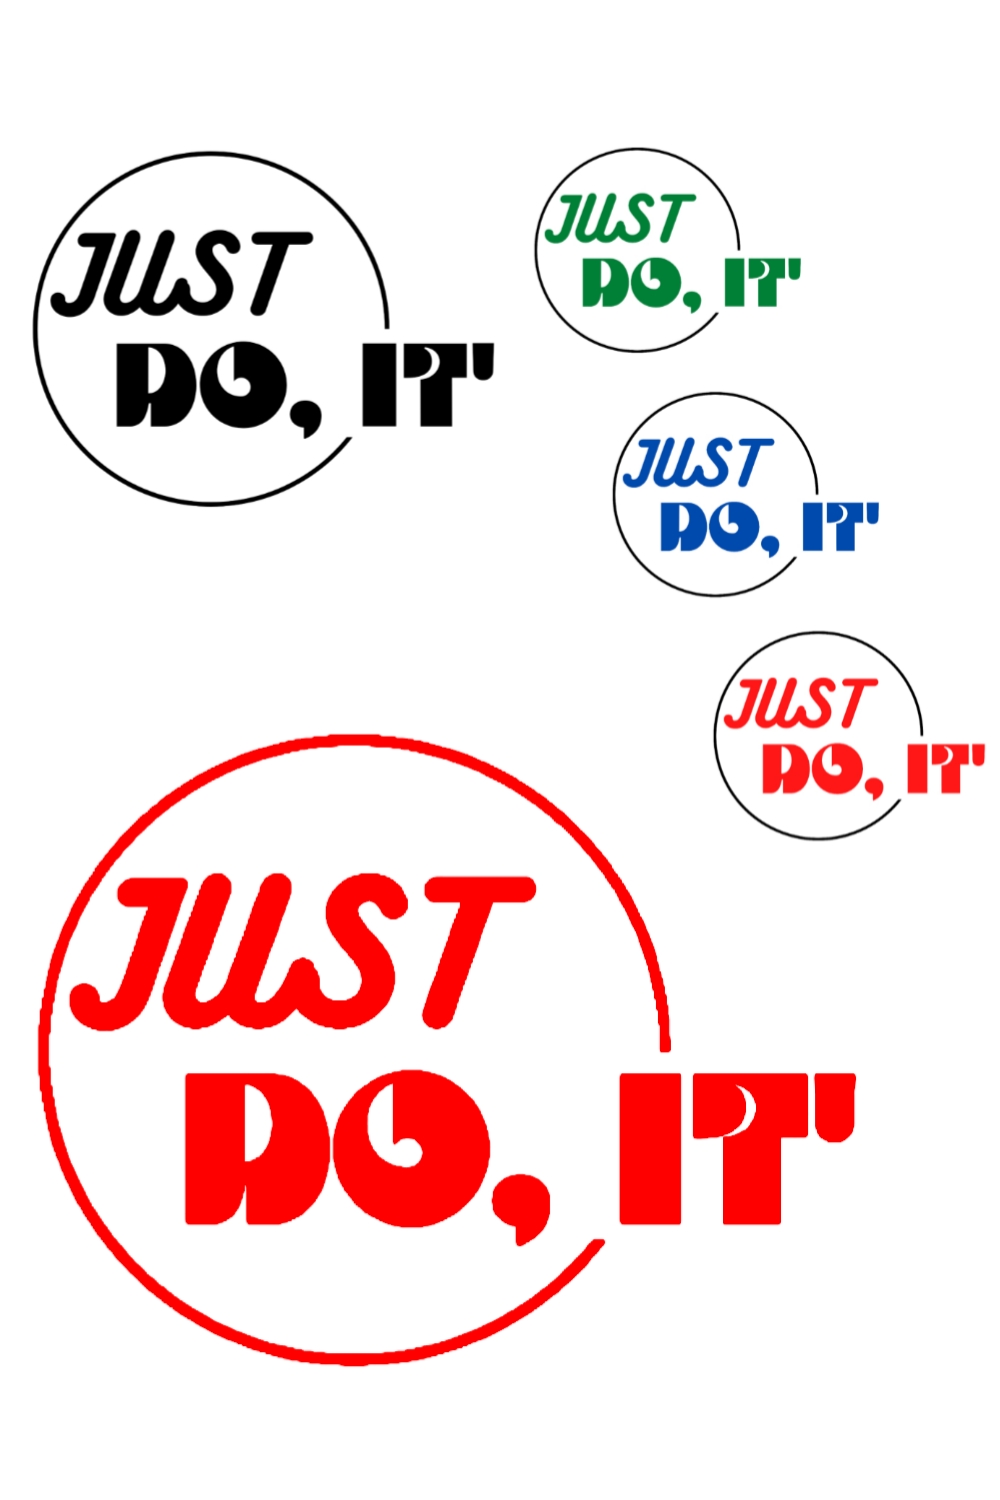 Just Do It Typography T-shirts Design pinterest image.